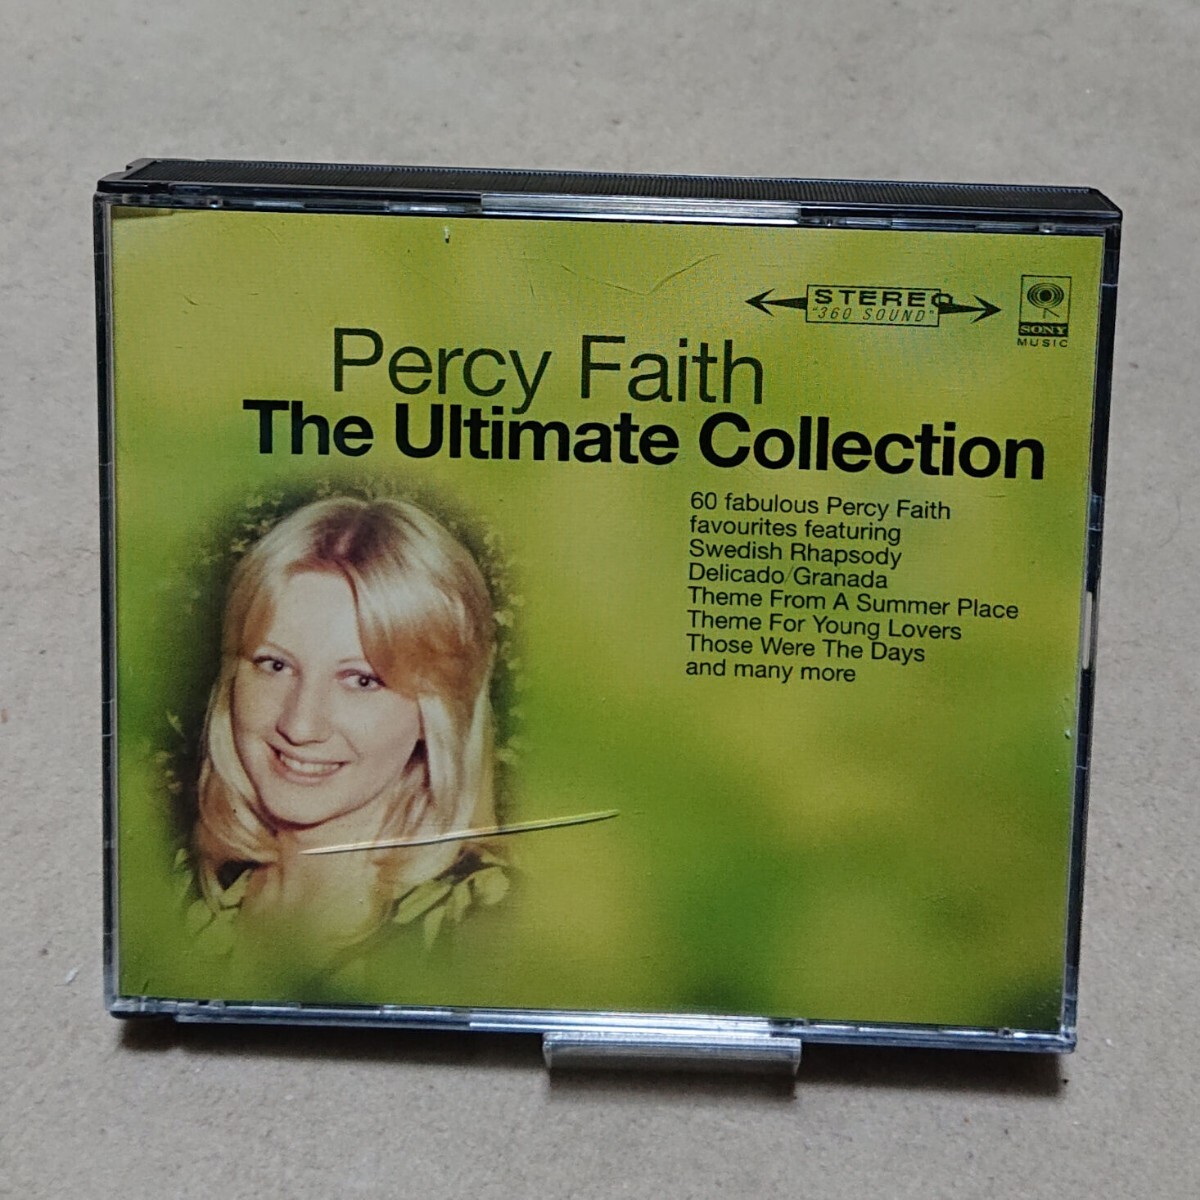 【CD】パーシー・フェイス Percy Faith The Ultimate Collection《3枚組》の画像2